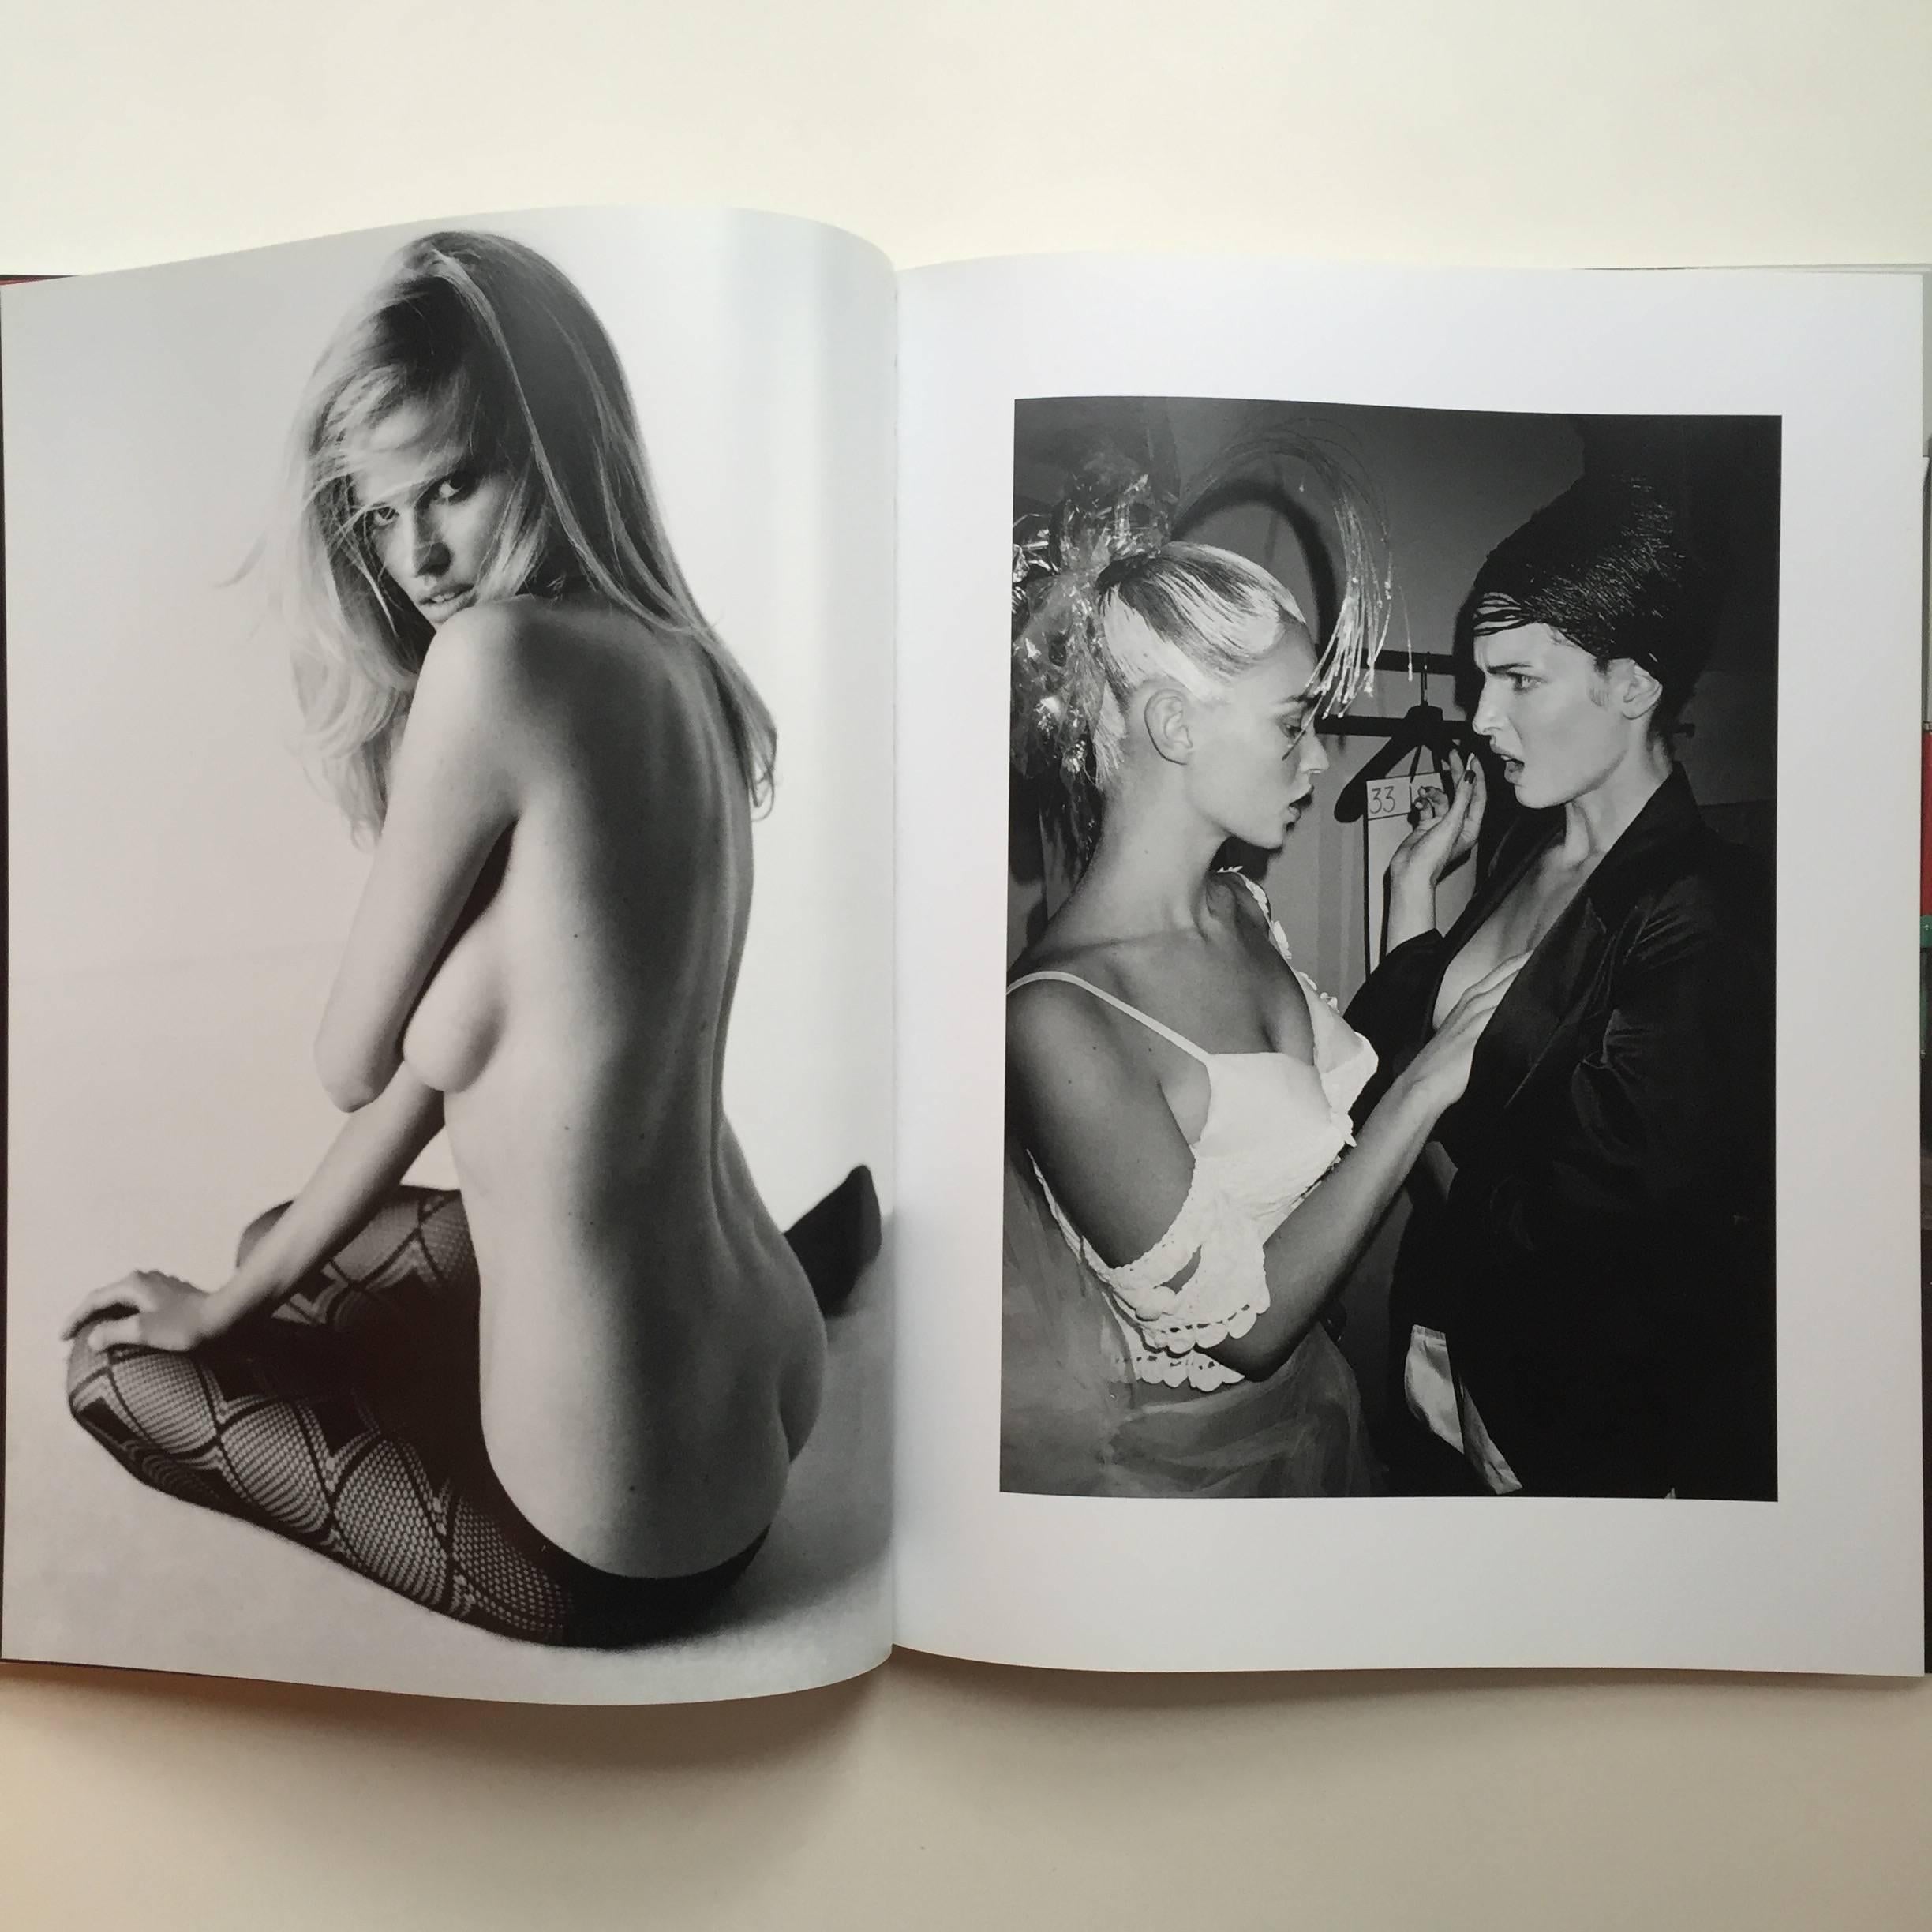 First edition, published by Taschen, 2012

A collection of stunning photographs chosen by Testino from the span of his 30-year career. Larger than life, brightly lit and highly colourful these photographs range from royals to celebrities. Testino